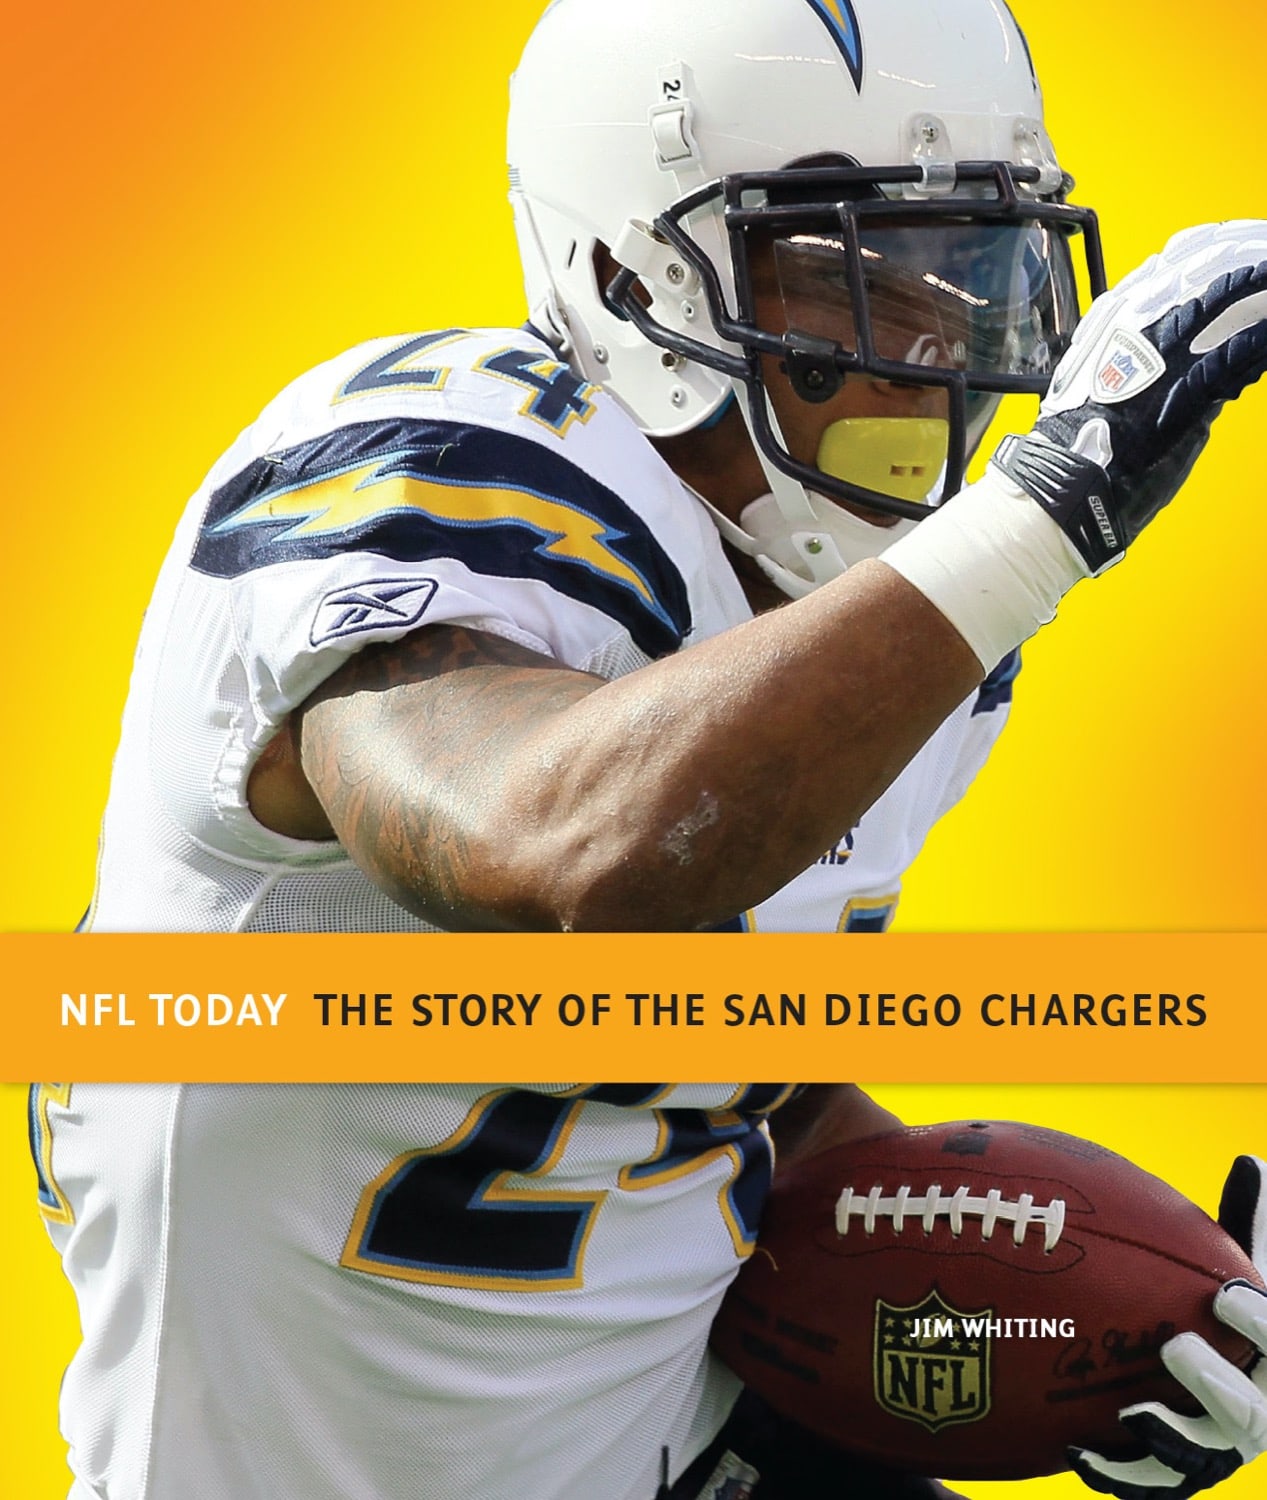 NFL Today: The Story of the San Diego Chargers